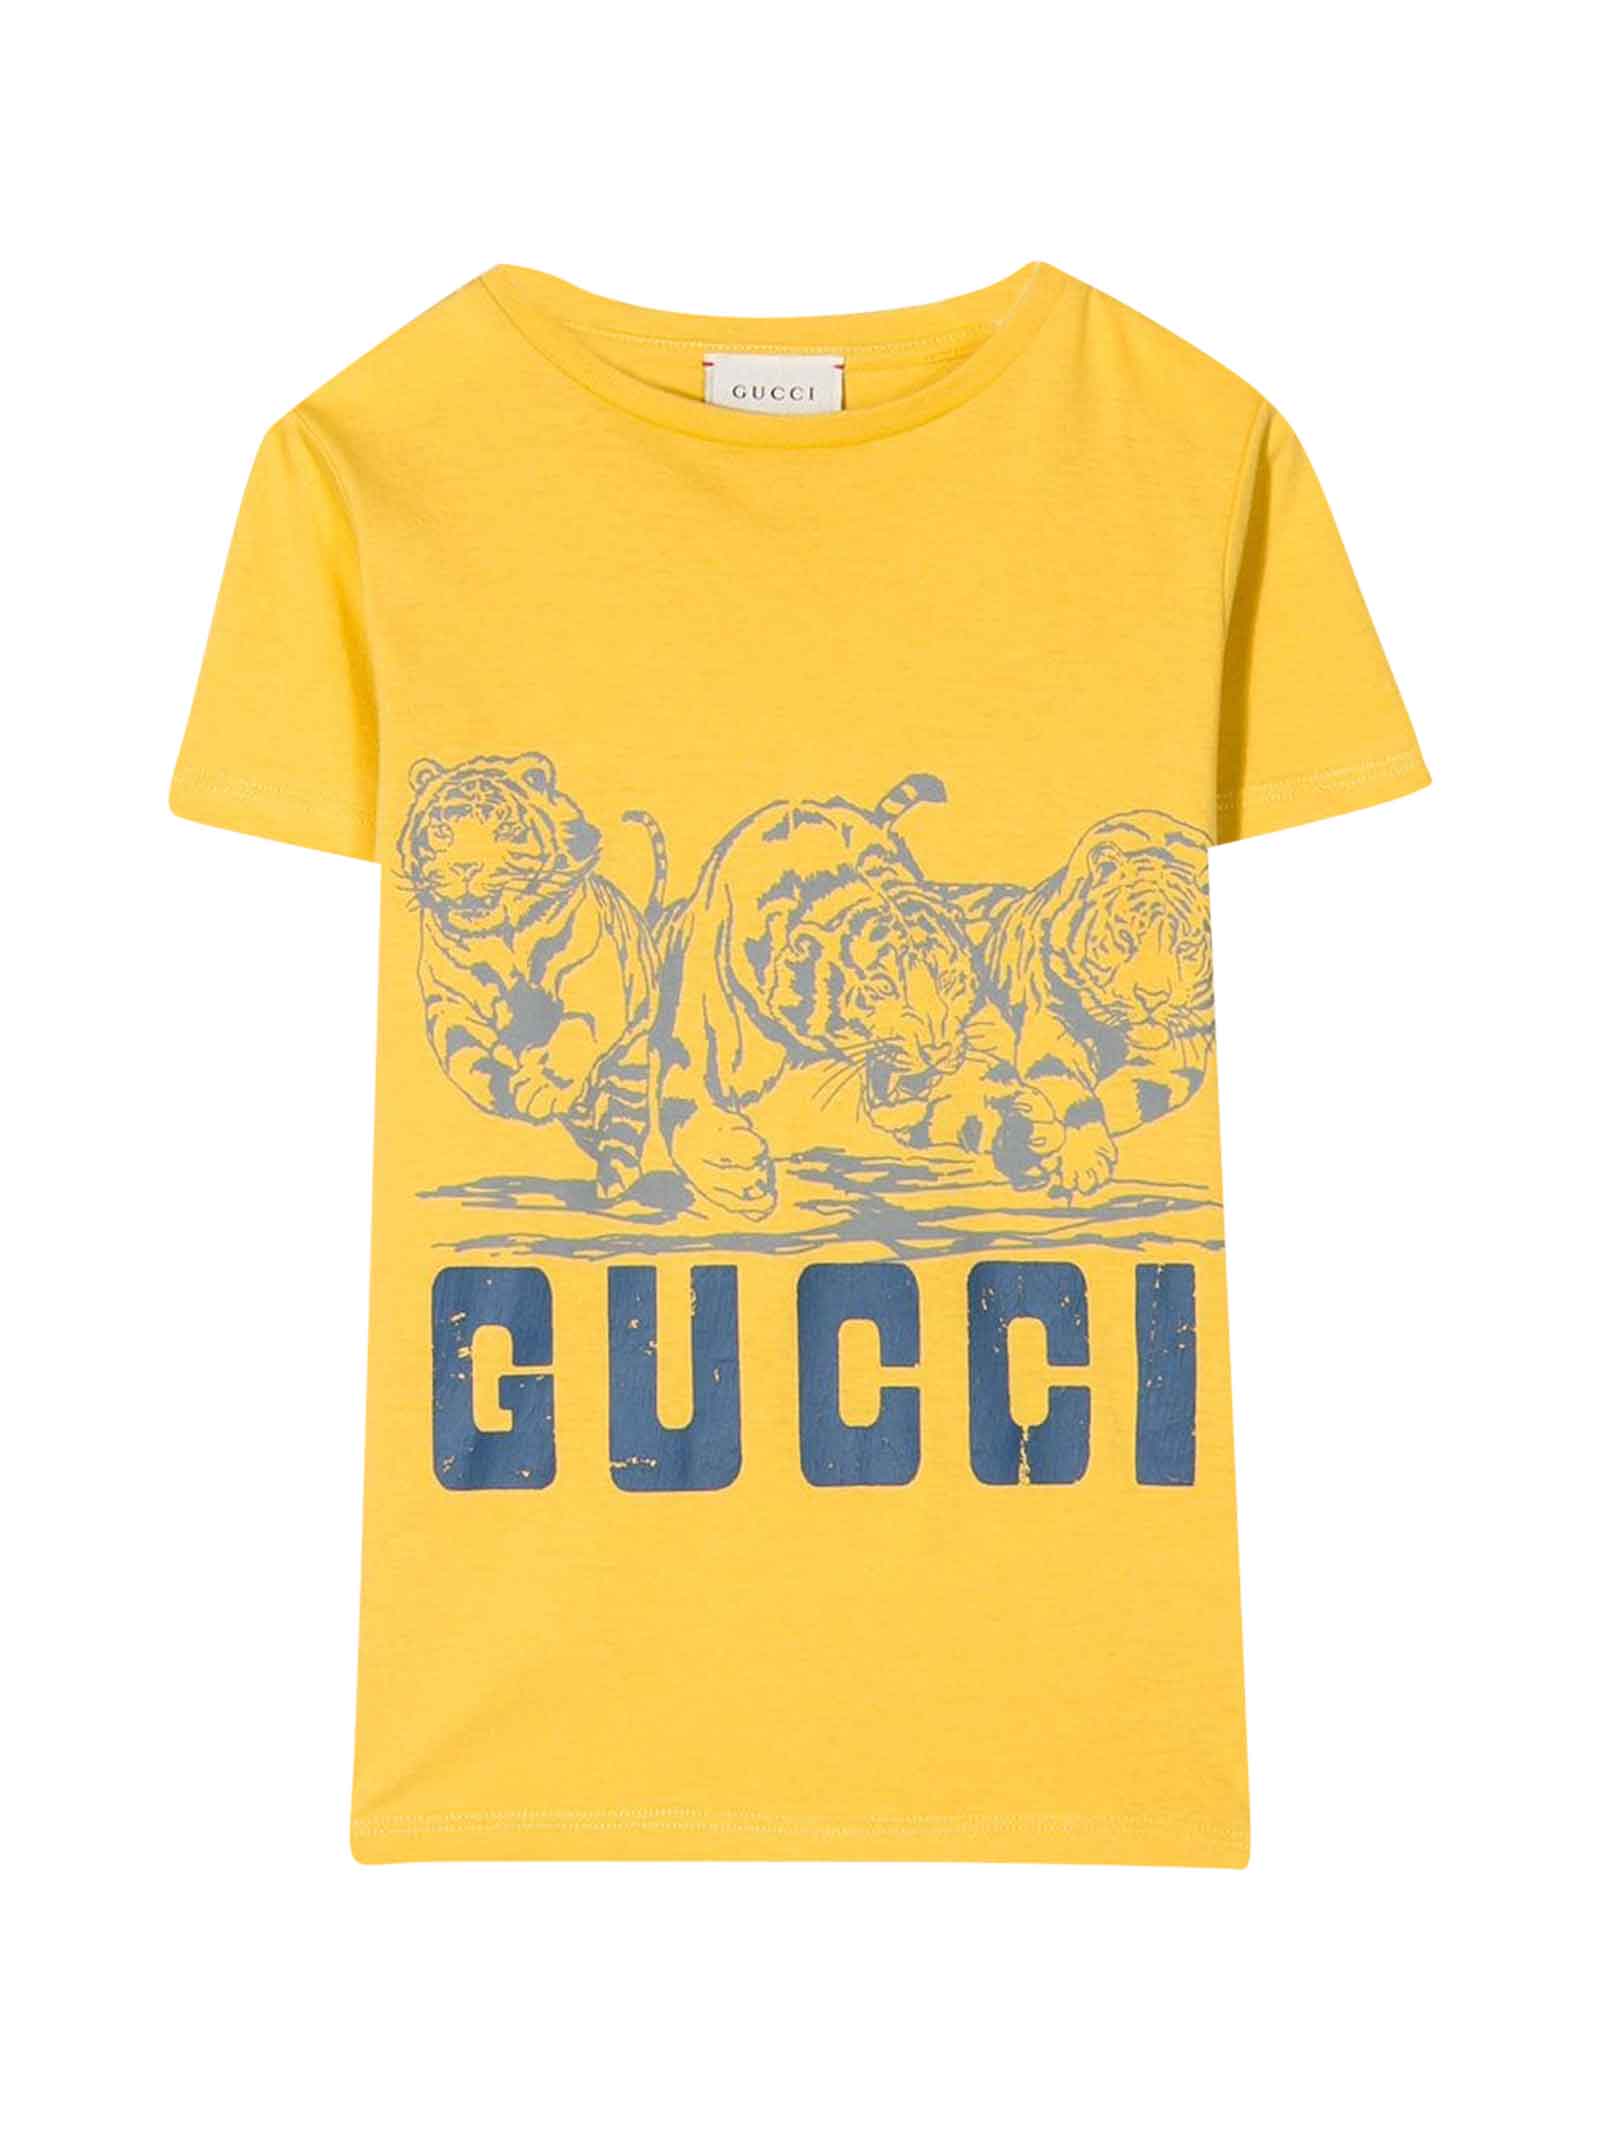 Gucci Kids' Yellow T-shirt With Frontal Logo In Giallo | ModeSens